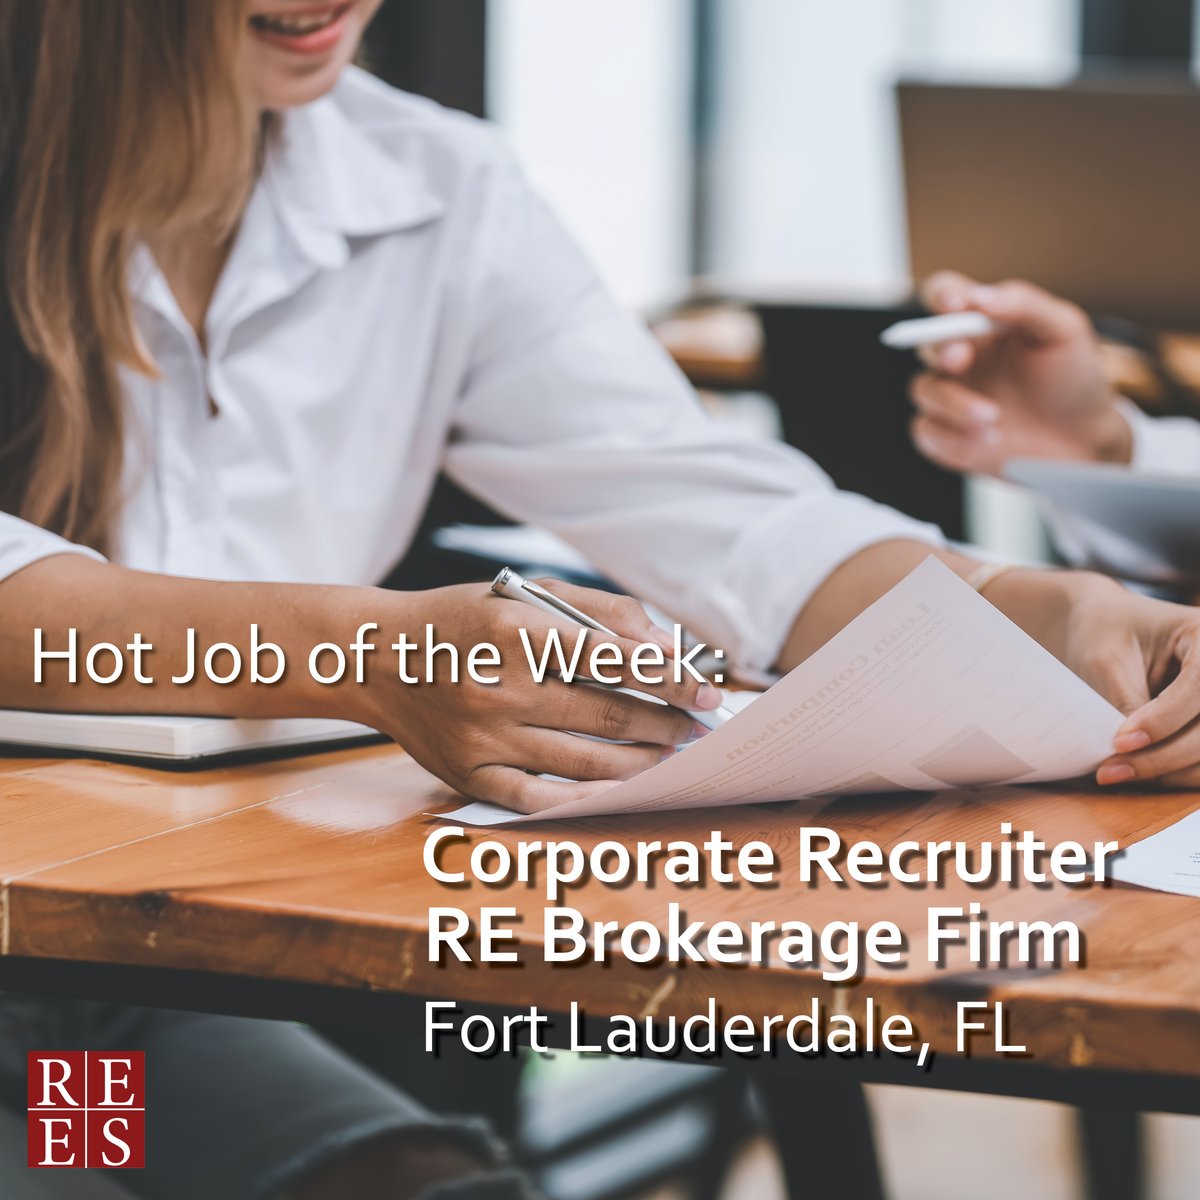 #HotJob of the Week: Corporate Recruiter for RE Brokerage Firm in Fort Lauderdale, FL

Our client is seeking a candidate to schedule interviews, attend fairs, assist with broker onboarding, weekly reports, and perform other duties.
#recruiters #multifamily #realestatejobs #hiring